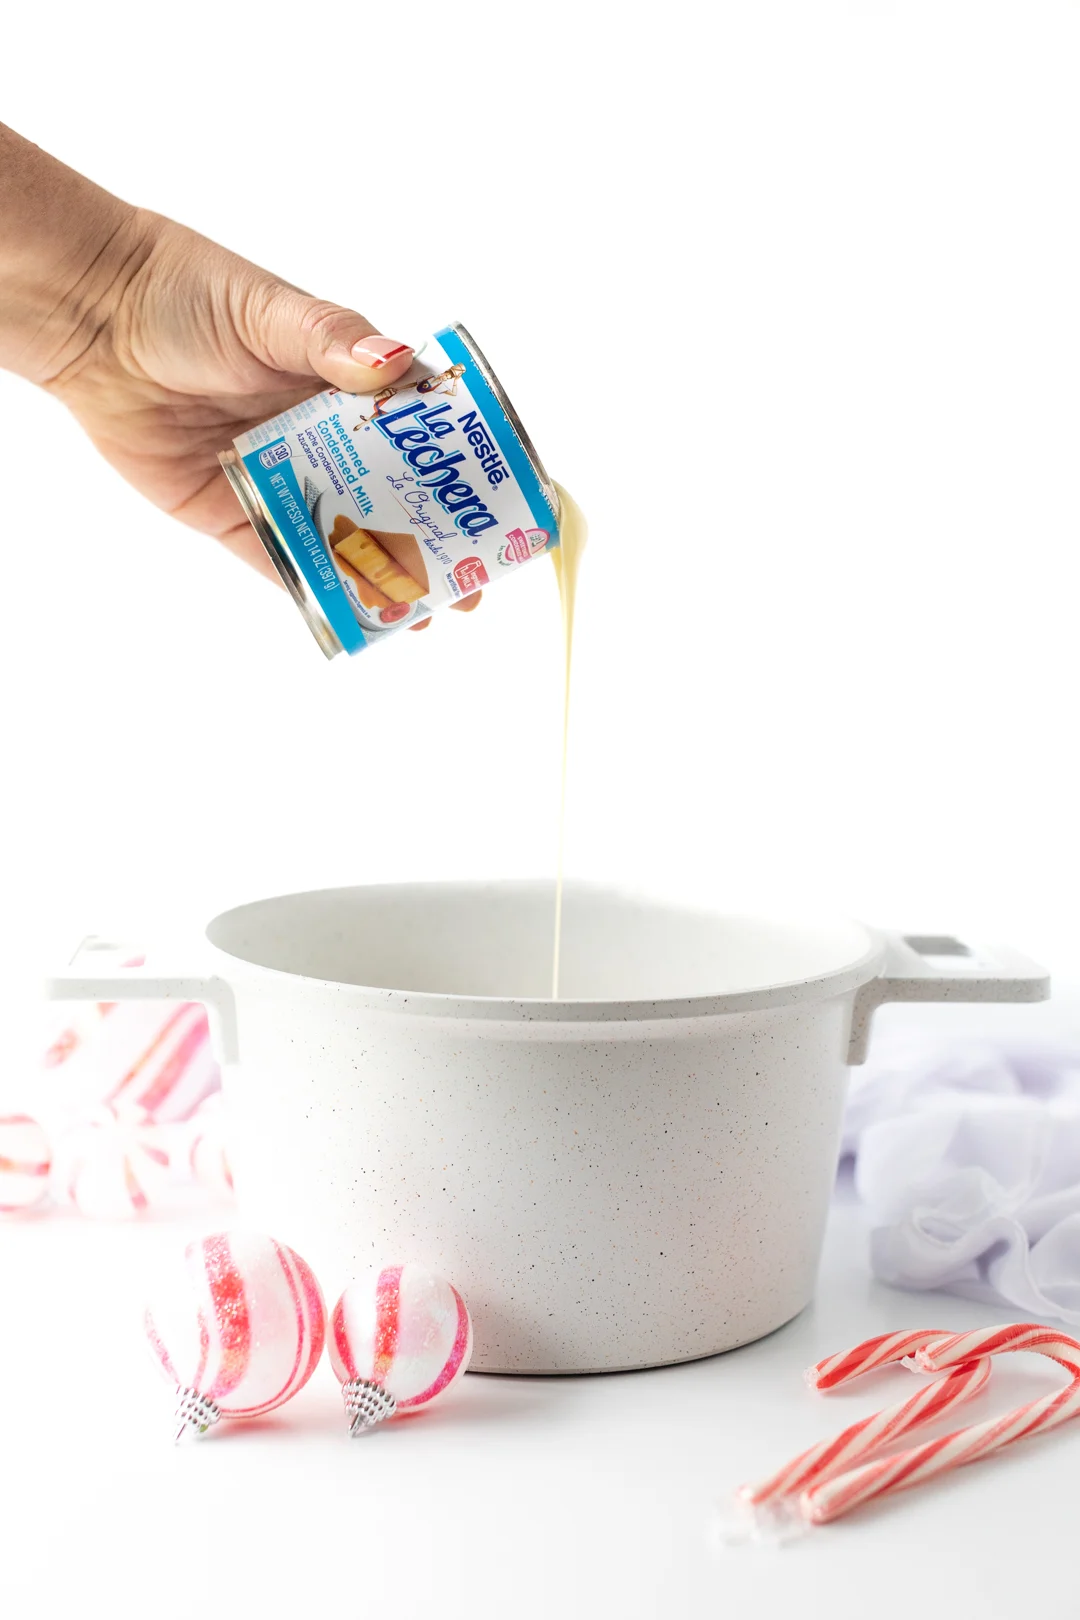 woman pouring can of la lechera sweetened condensed milk into a sauce pan.